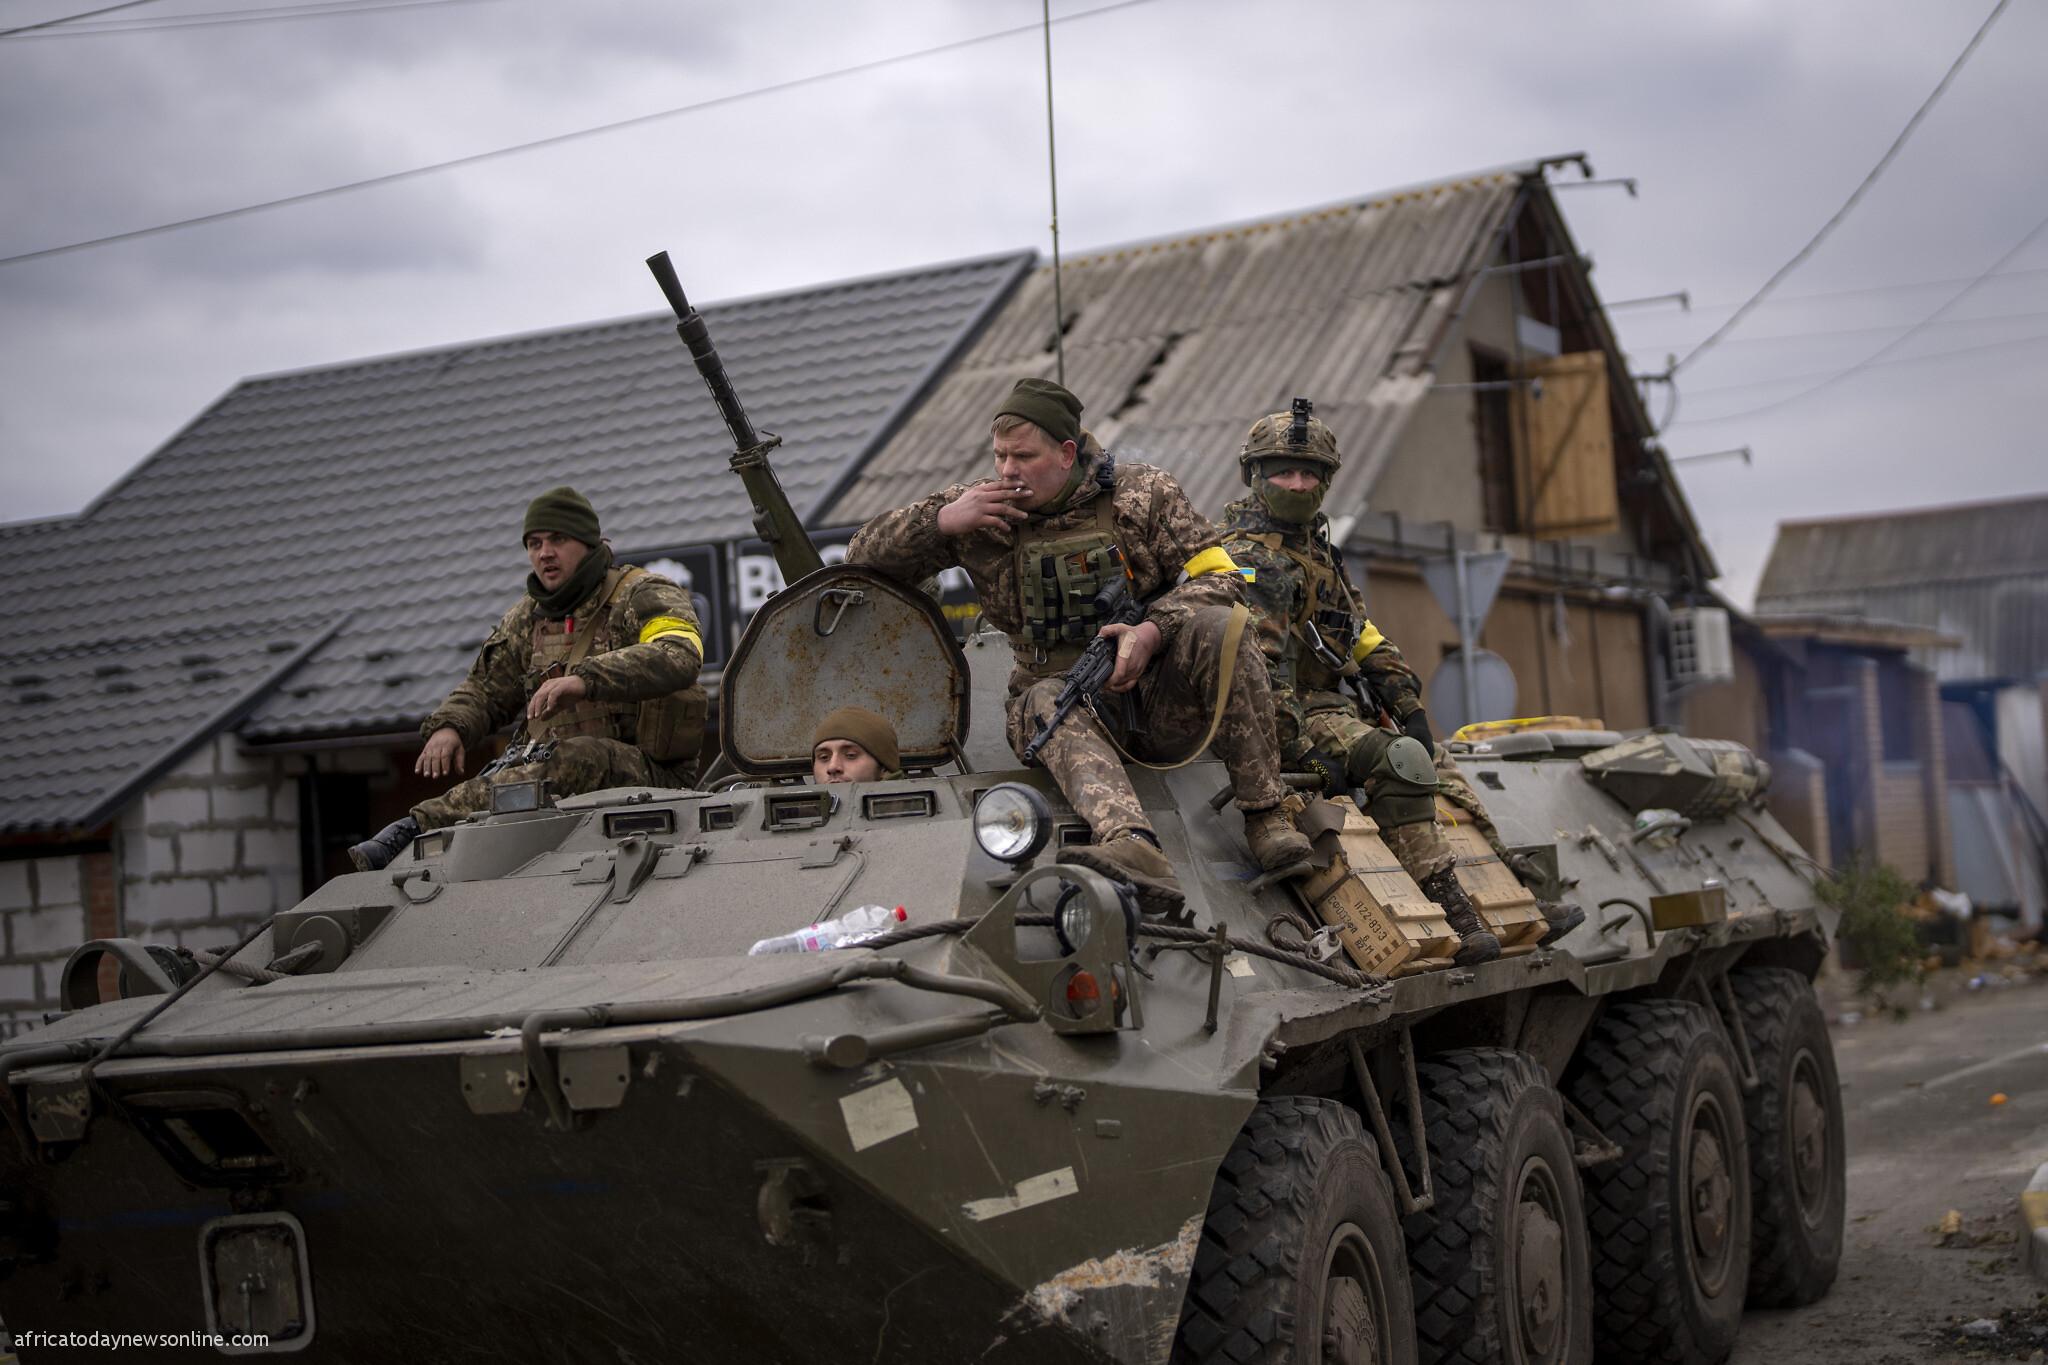 War Four Ukrainian Soldiers, 10 Others Killed In Sumy